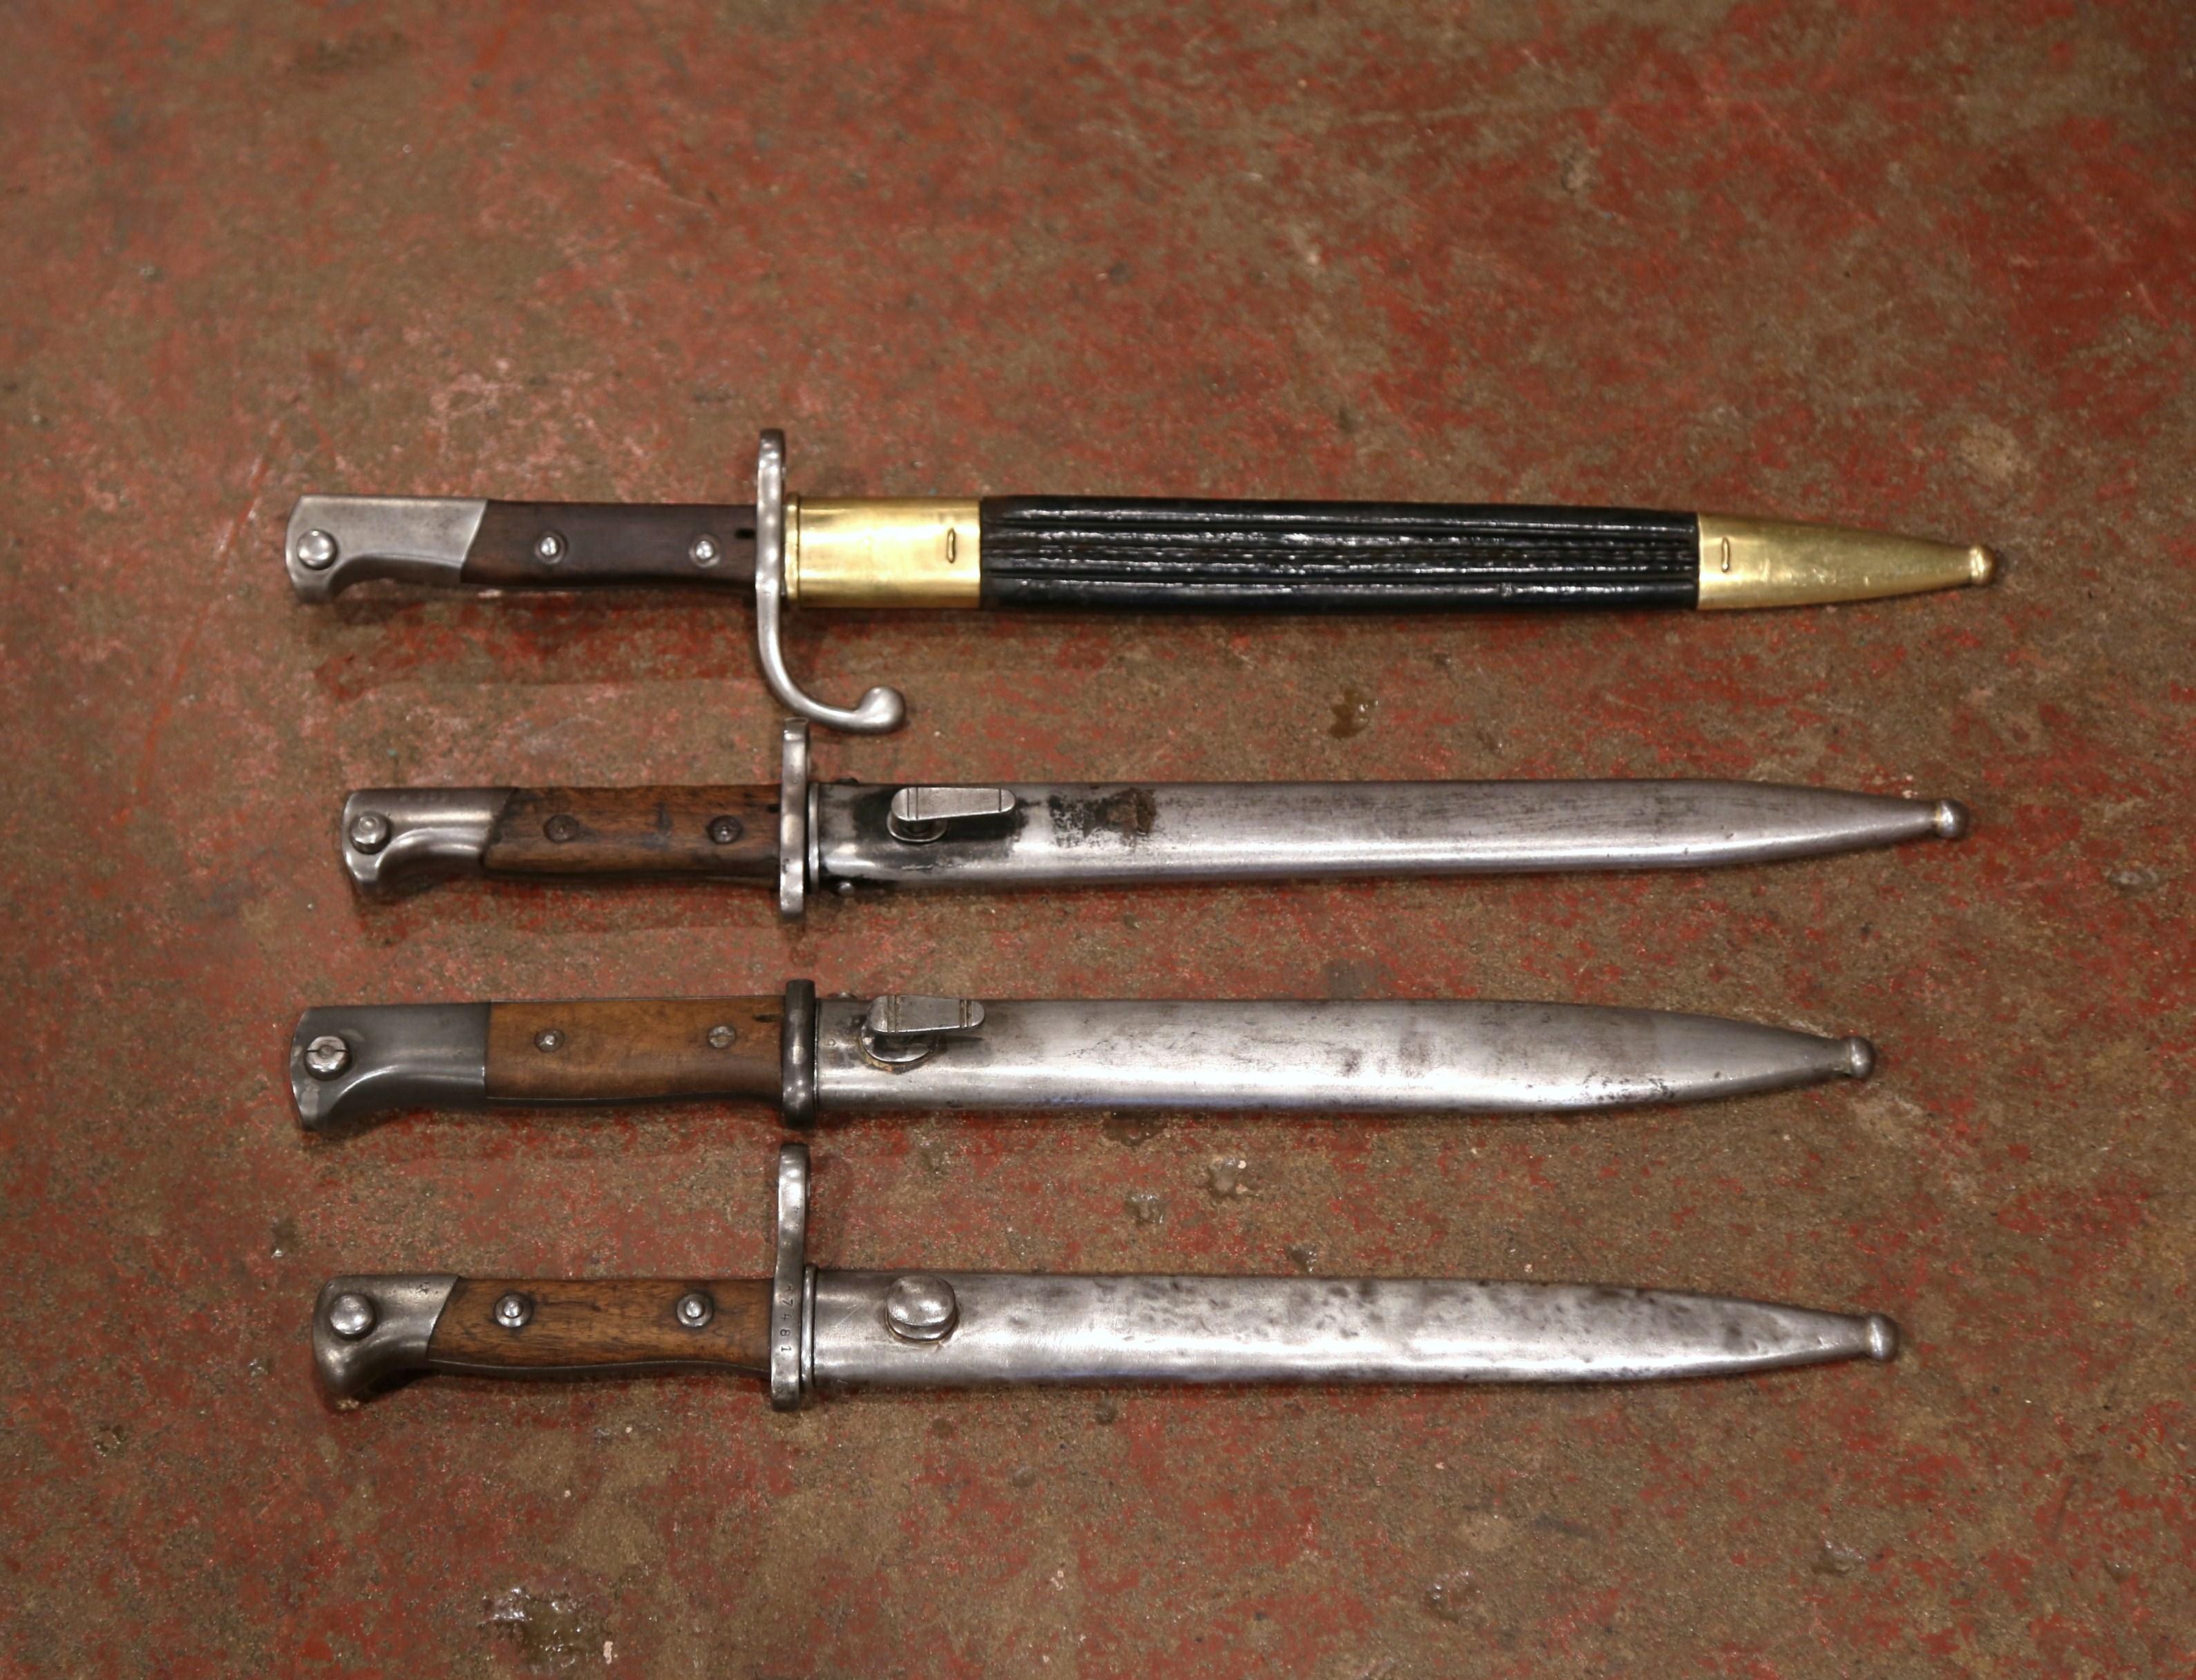 Hand-Crafted Set of Four 19th Century German Iron Bayonets and Sheaths with Wood Handles